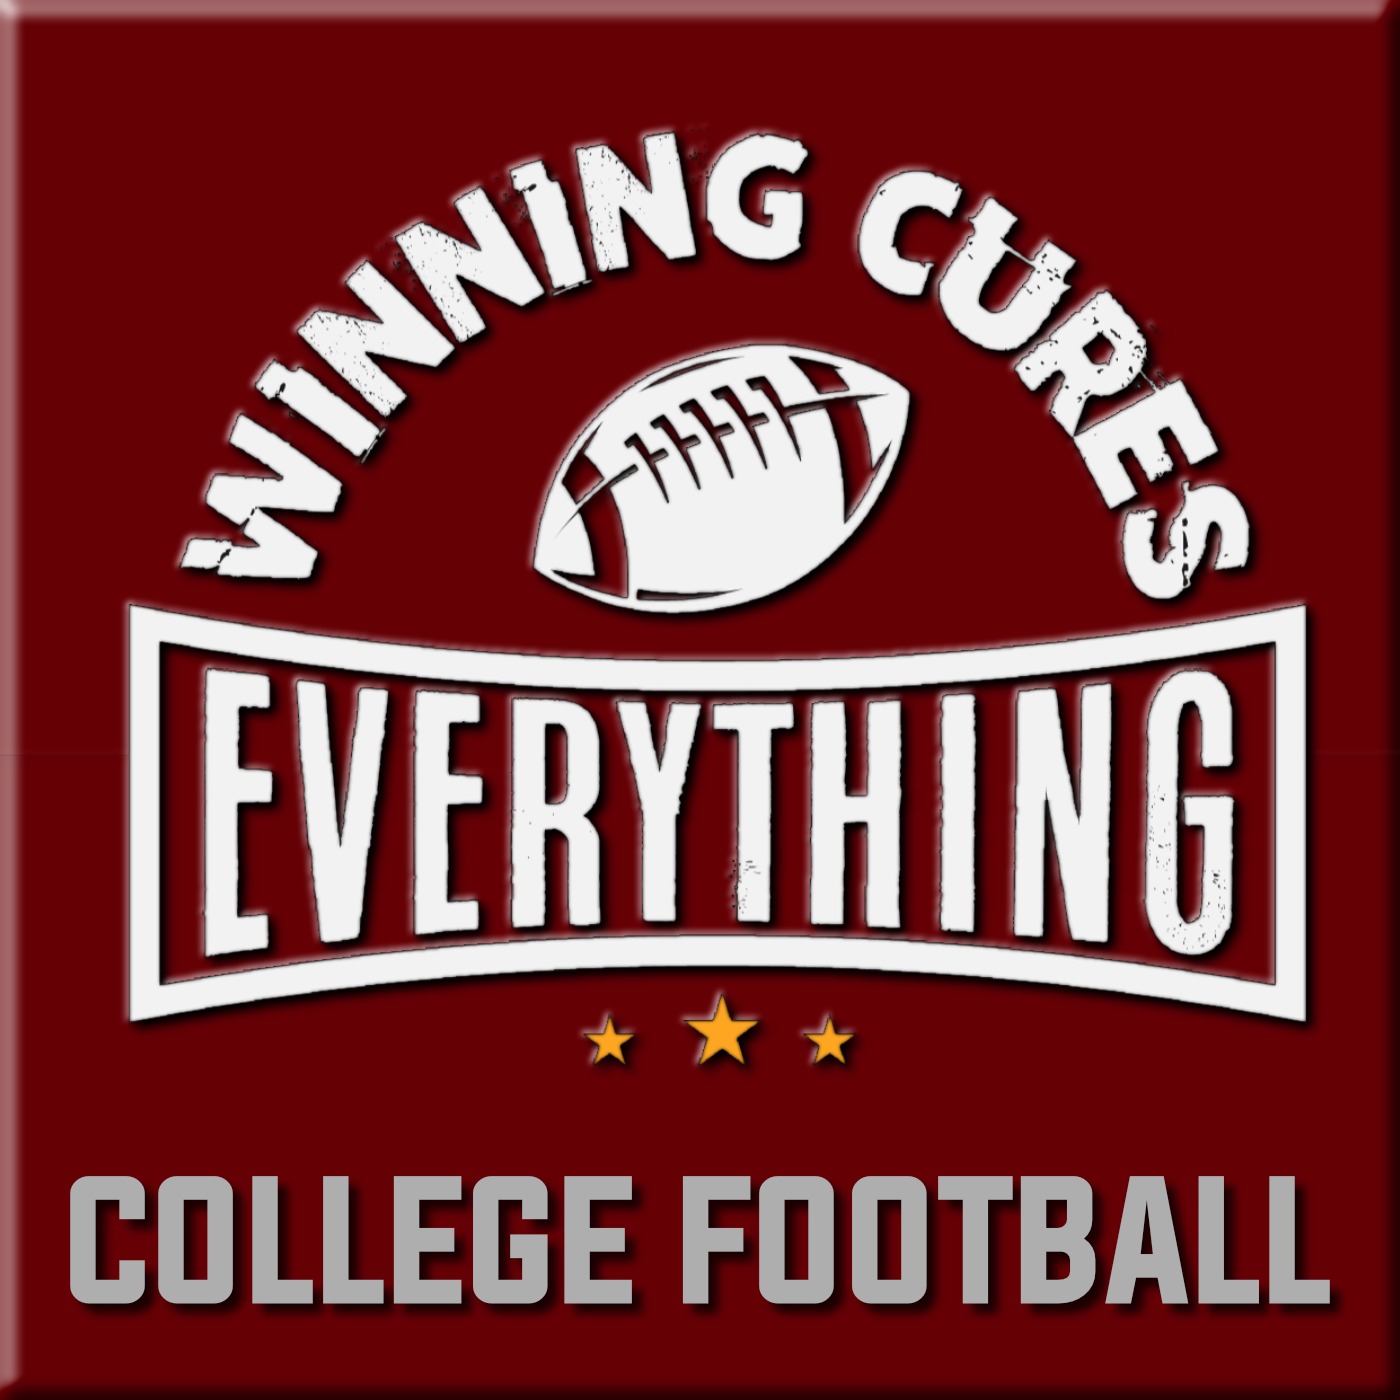 Winning Cures Everything